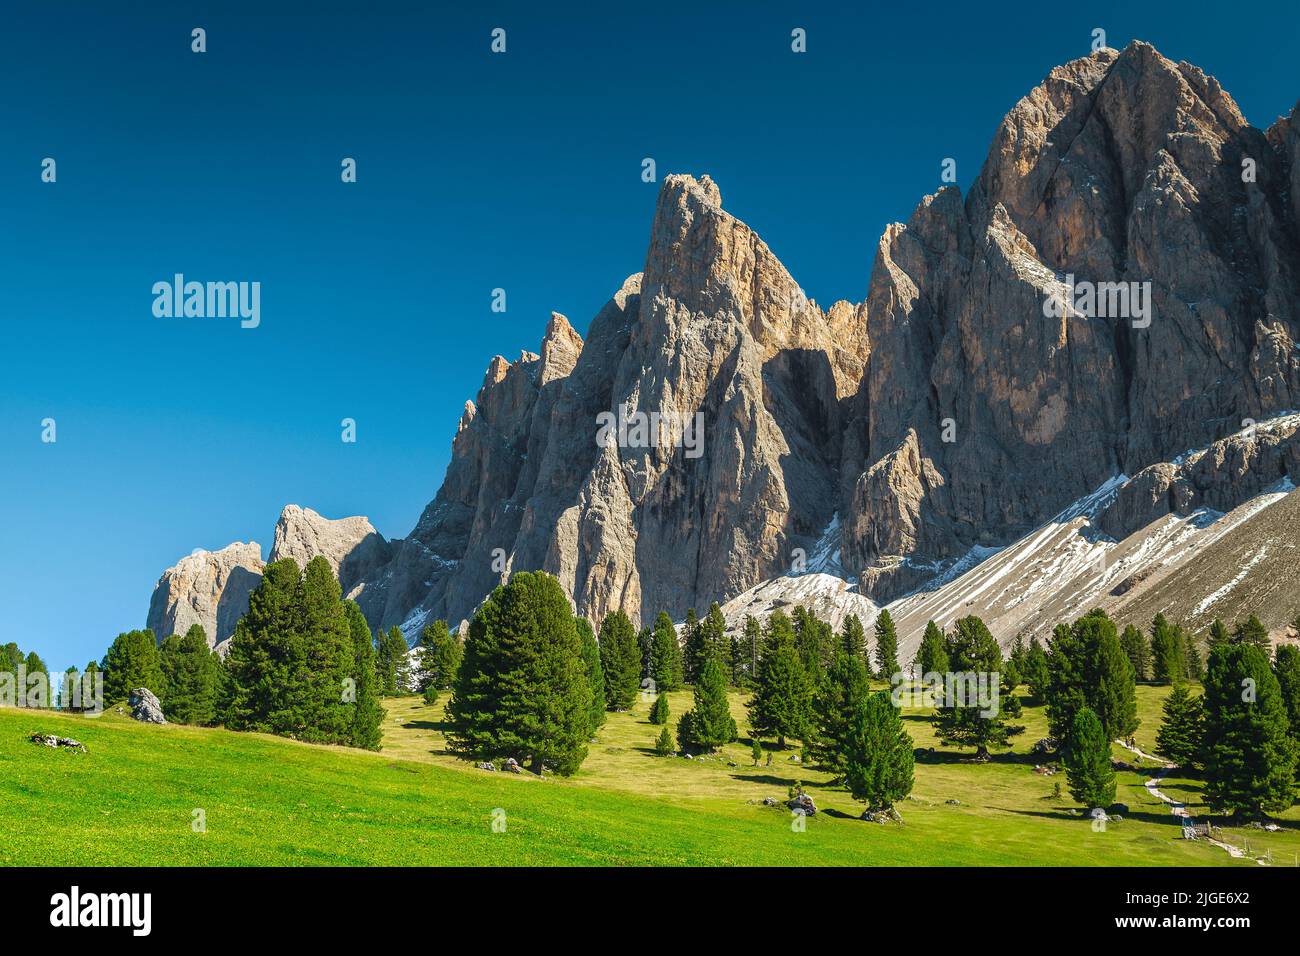 Summer alpine pasture, green grassland, pine trees and high snowy mountains in background, Geisler - Odle mountain group, Alto Adige, Dolomites, Italy Stock Photo